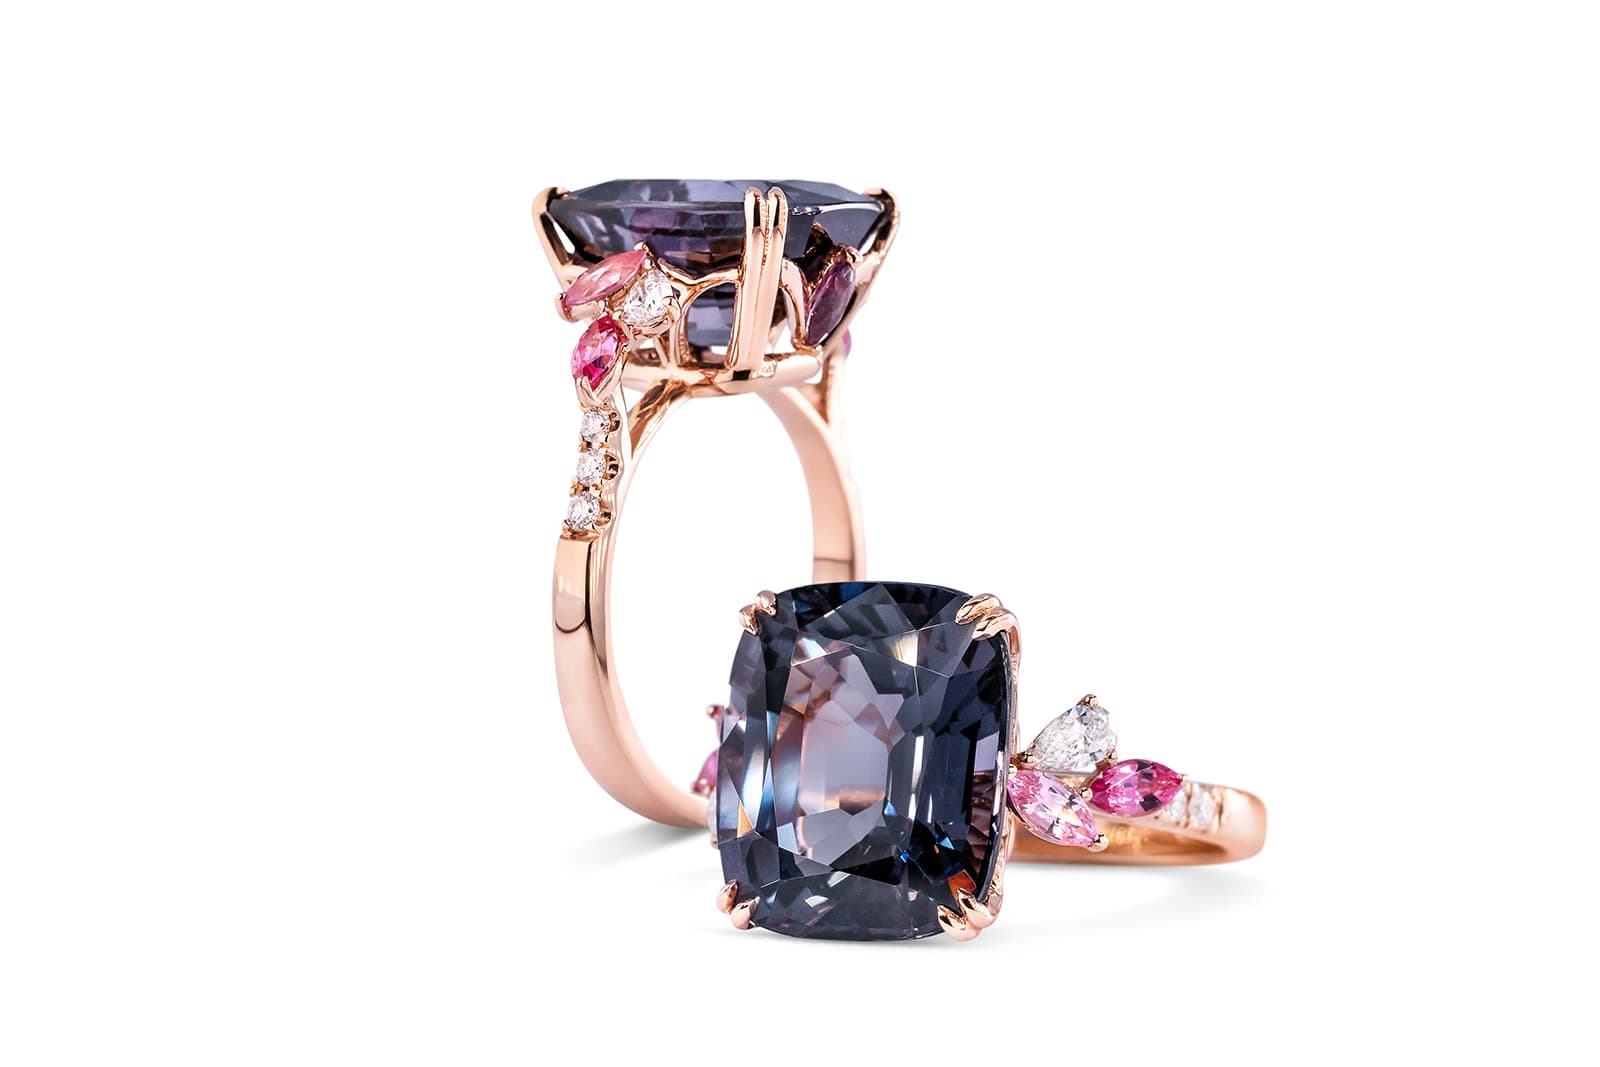 Almost 8 carat grey spinel Madly ring with hot pink spinel and marquise diamond accents